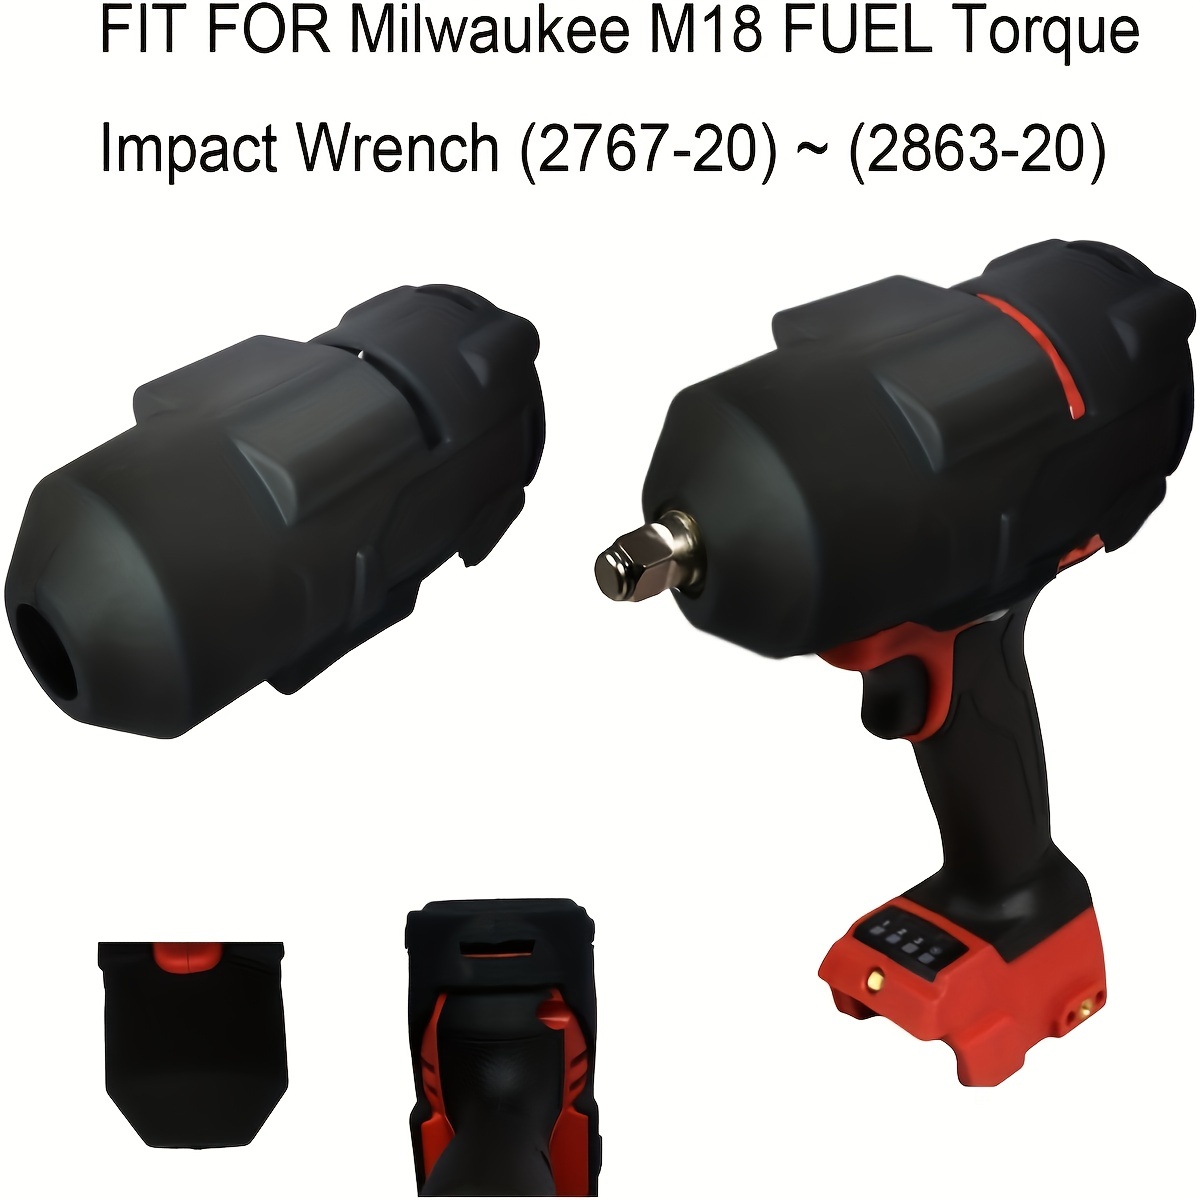 m18 protective boot 49 16 2767 high torque impact wrench boot compatible with milwaukee m18 fuel 1 2 high torque impact 2767 20 onekey version 2863 20 impact sockets 16mm